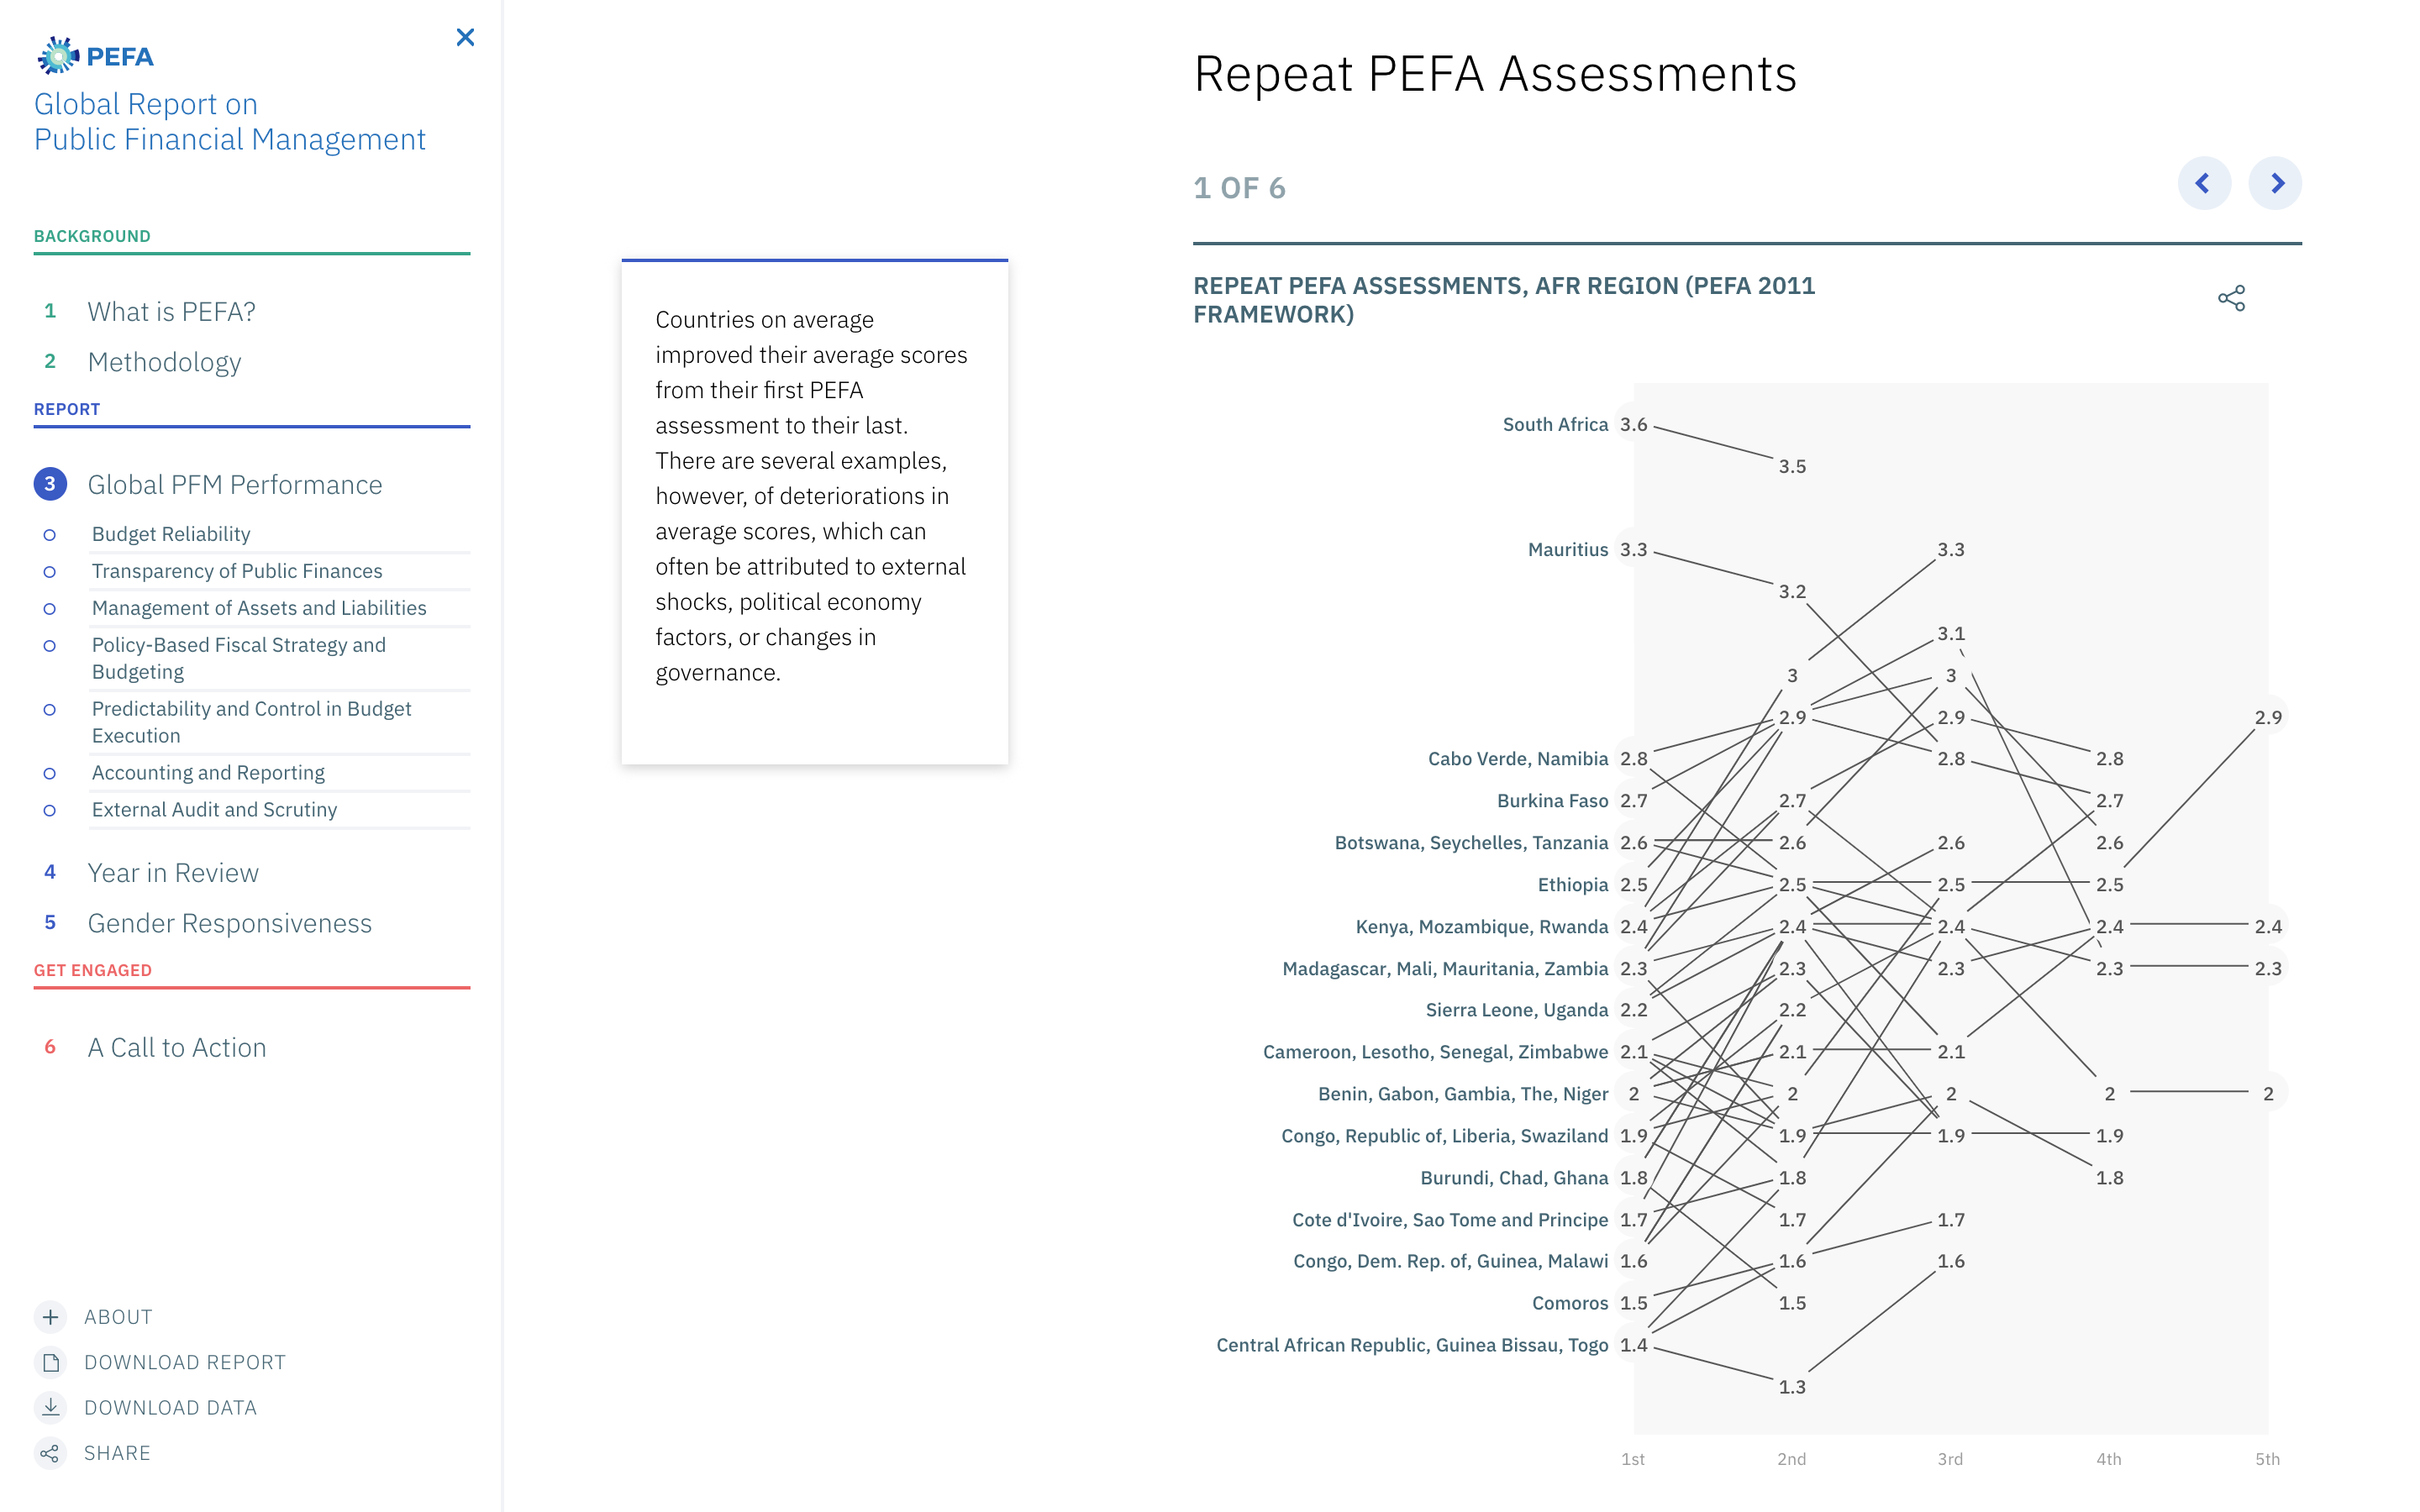 2020 PEFA Report on Global Financial Management: Chart 3